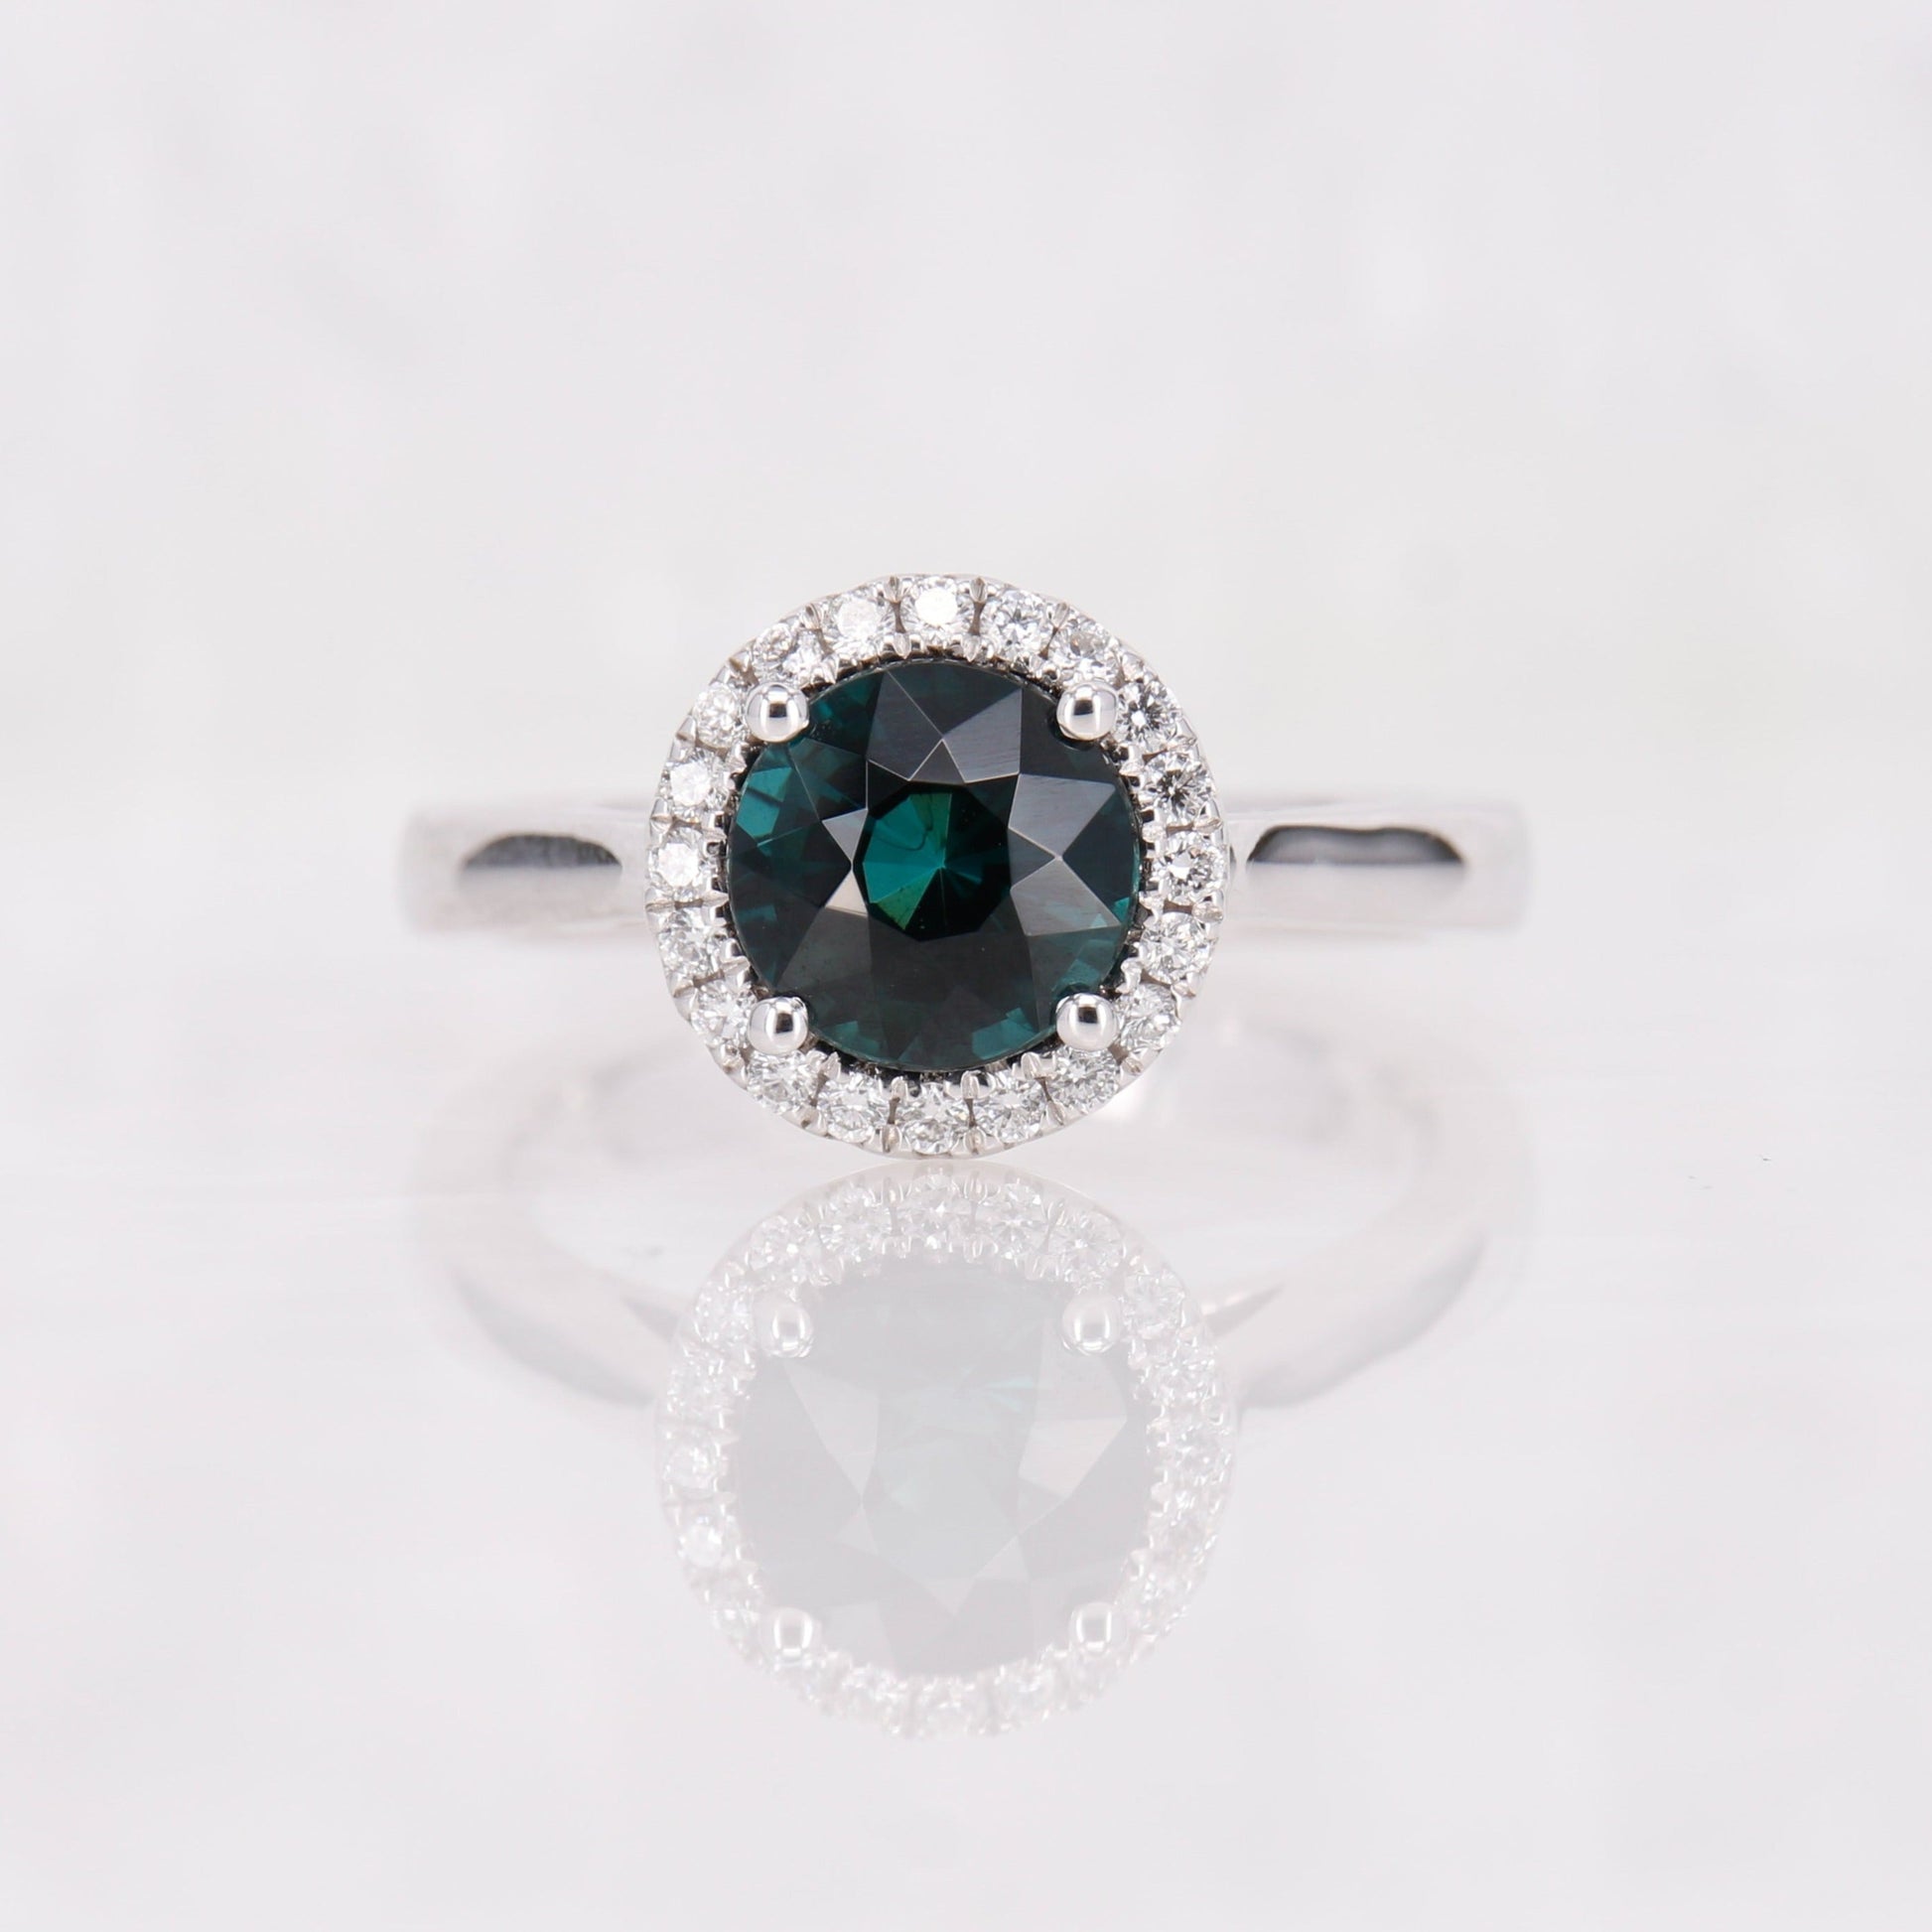 Blue tourmaline and diamond halo ring set in 18ct white gold. 